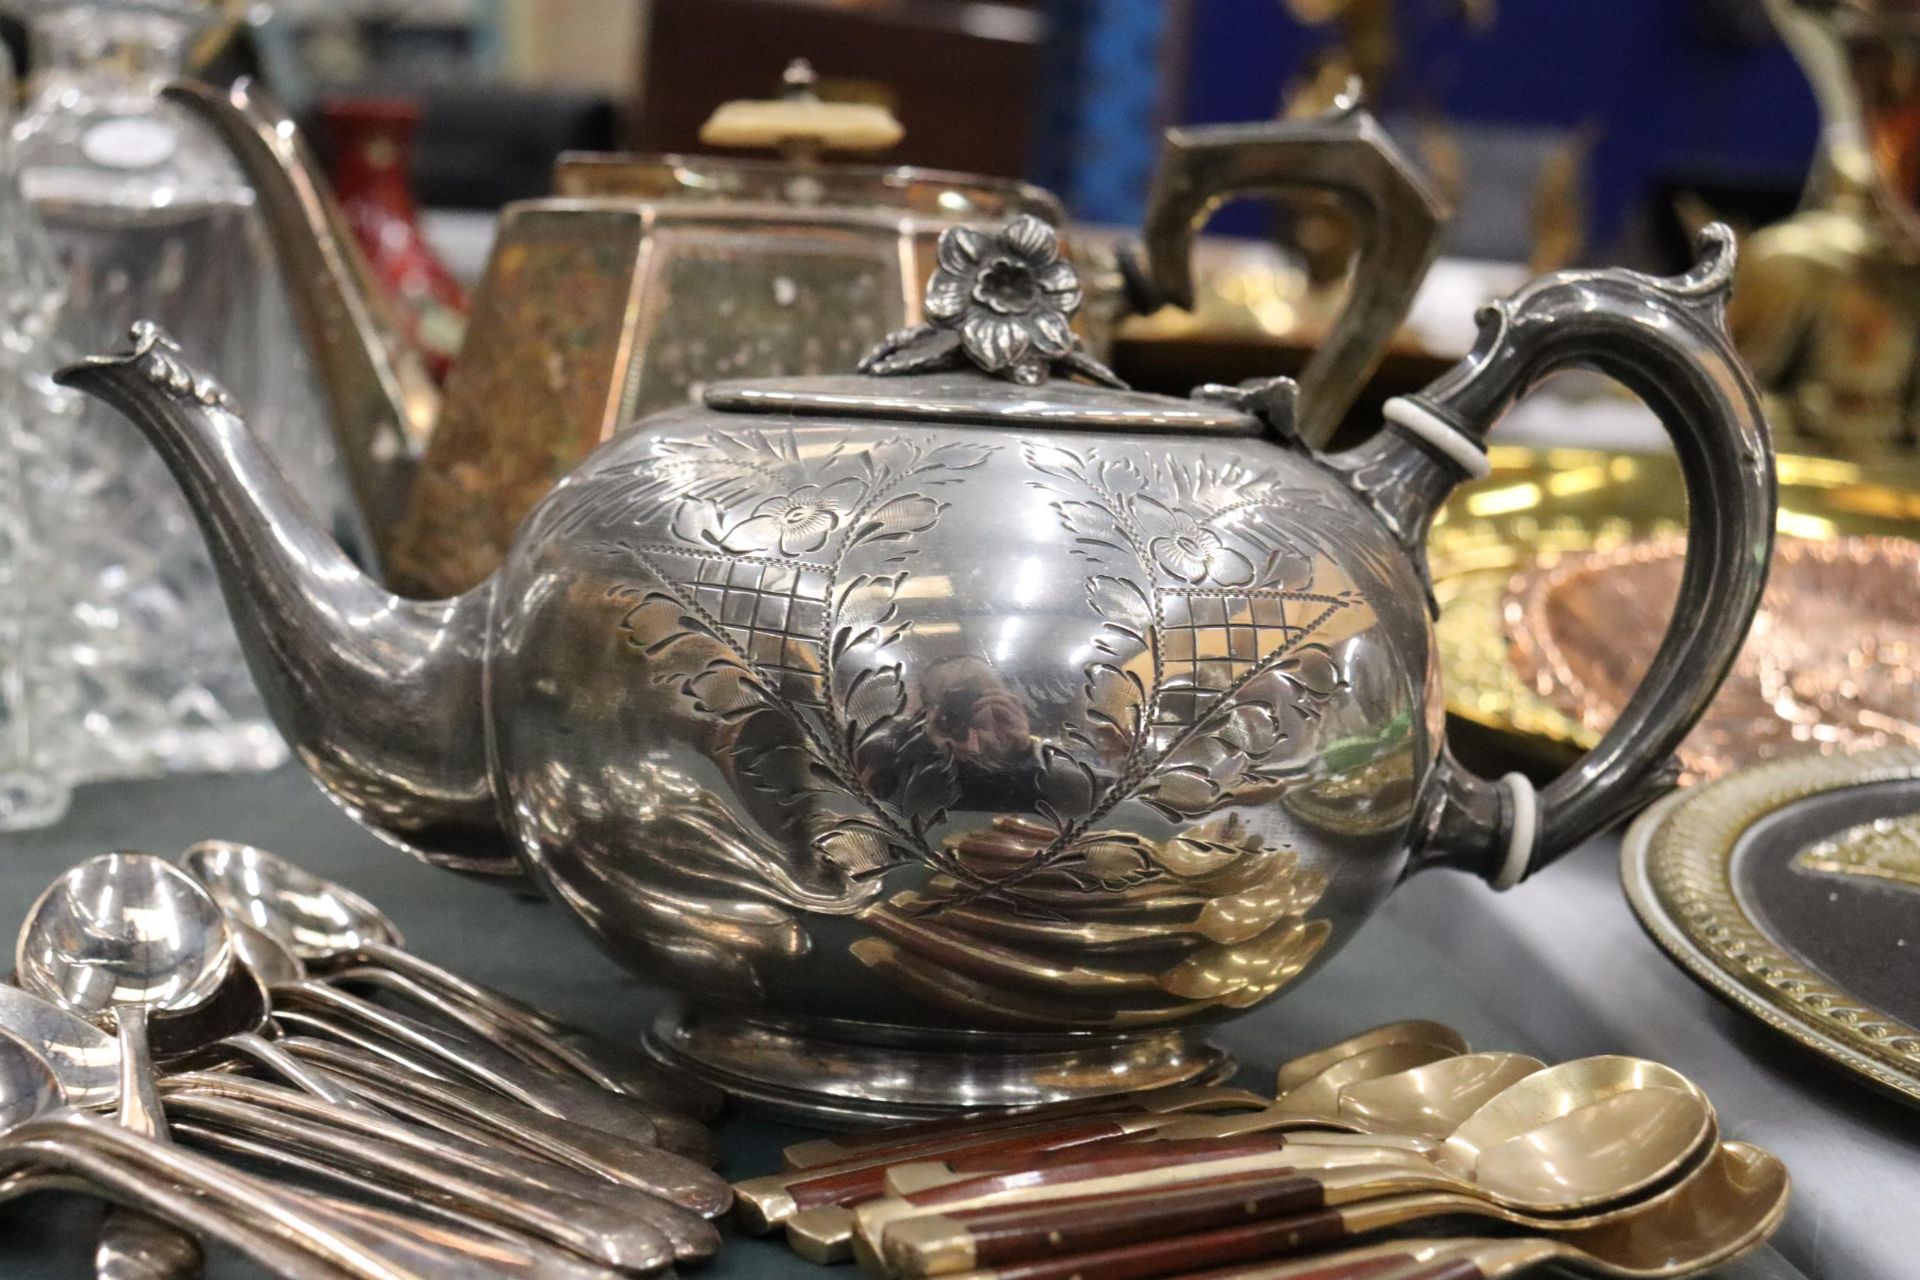 TWO SILVER PLATE ANTIQUE FOOTED ORNATE TEAPOTS ONE WITH FLOWER FINIAL THE OTHER STAMPED 1752 - Bild 4 aus 12